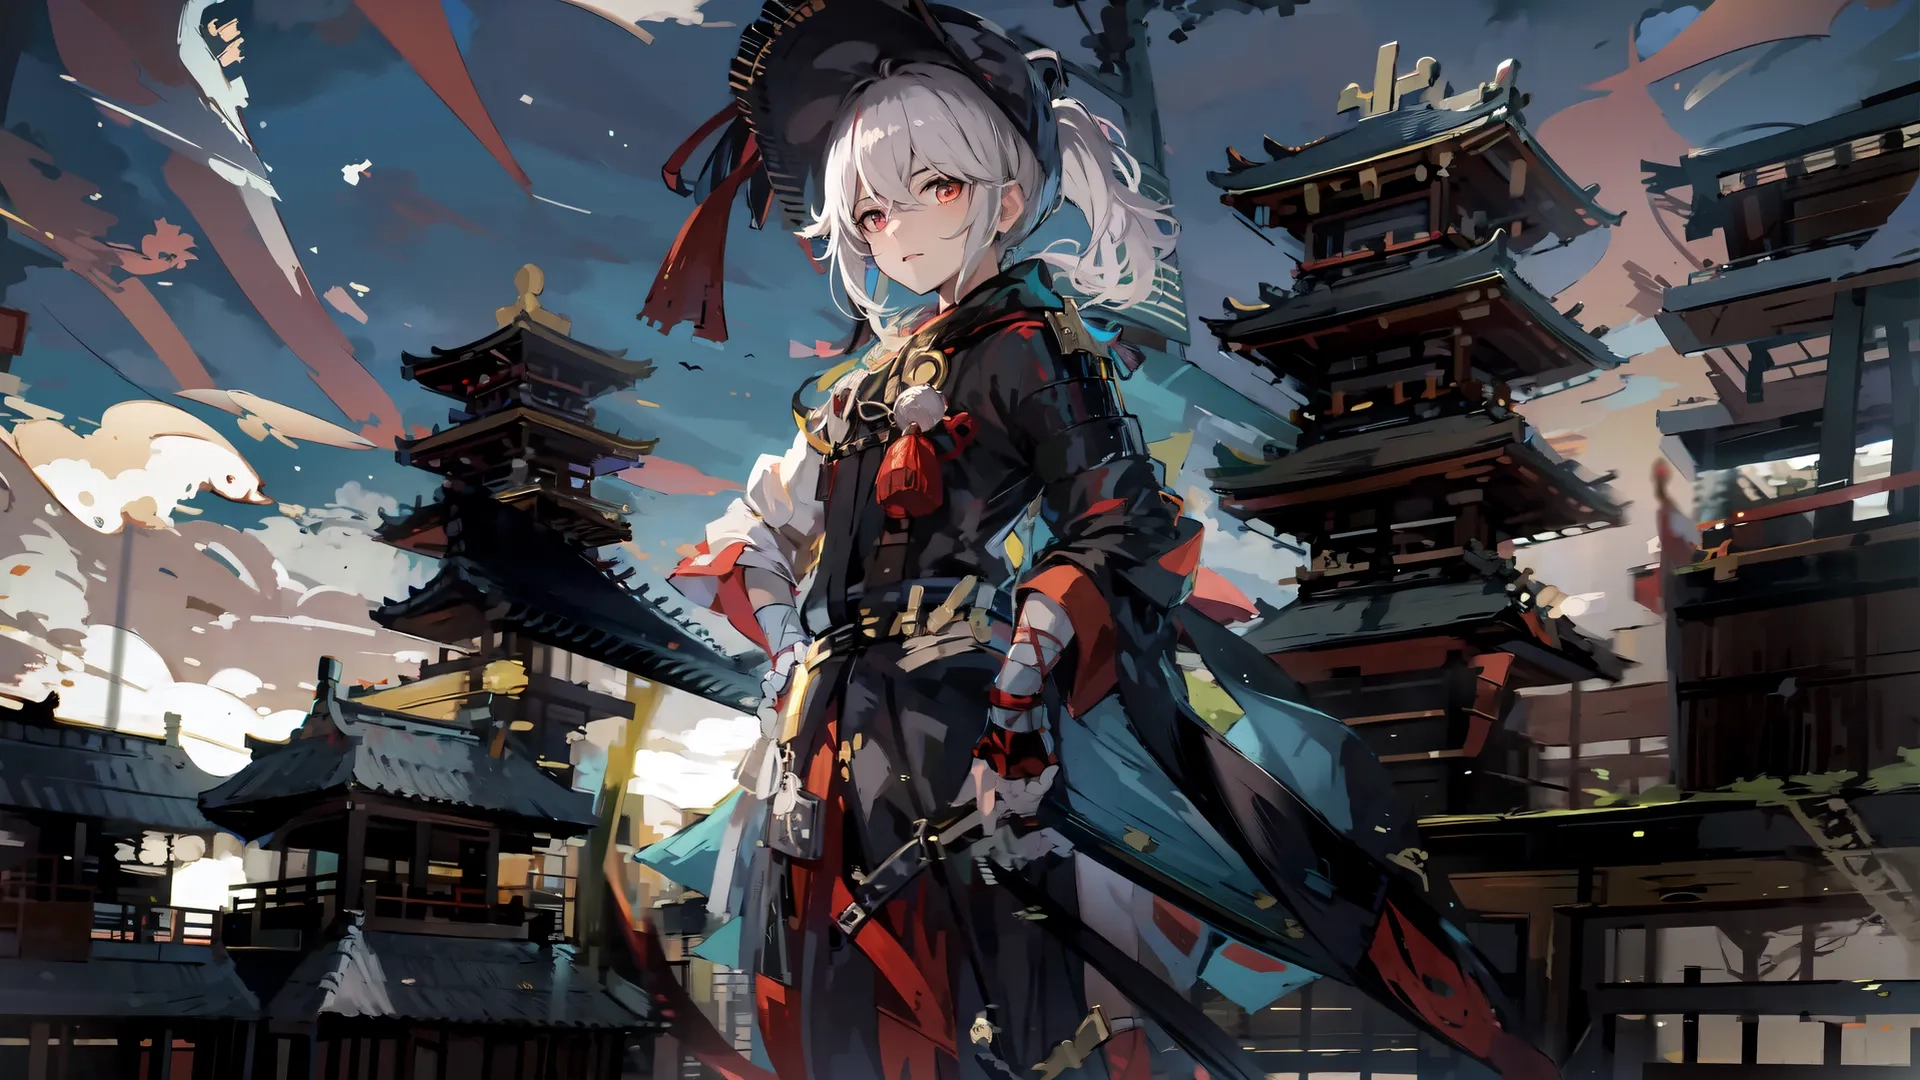 an anime dressed to look like a girl walking in the rain at night in a dark and full - color image with buildings, clouds and night - sky
